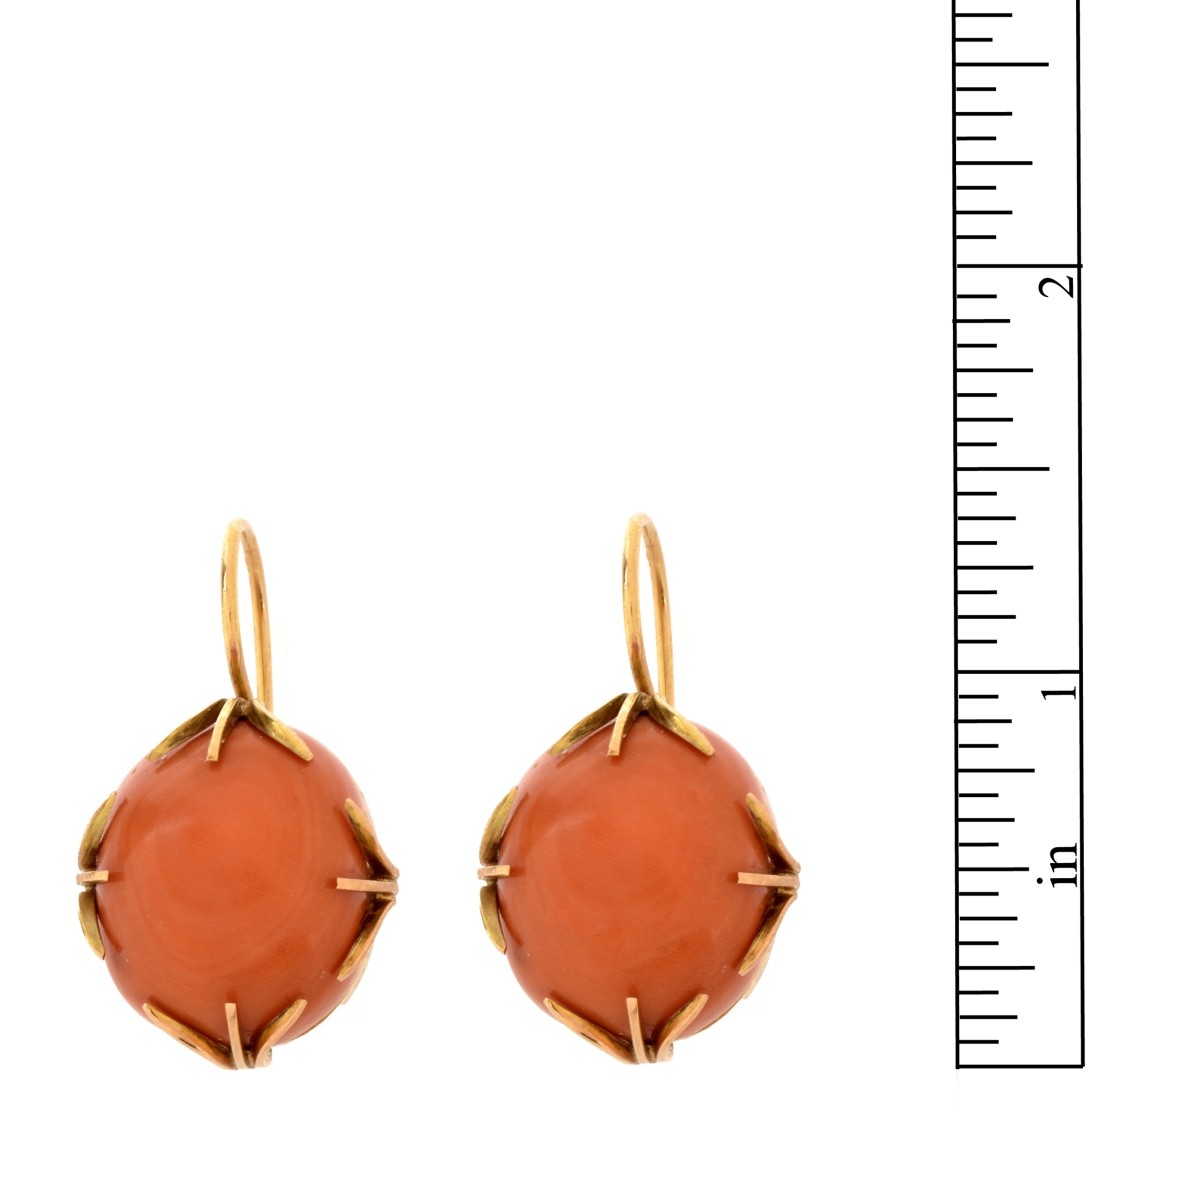 Coral and 18K Earrings